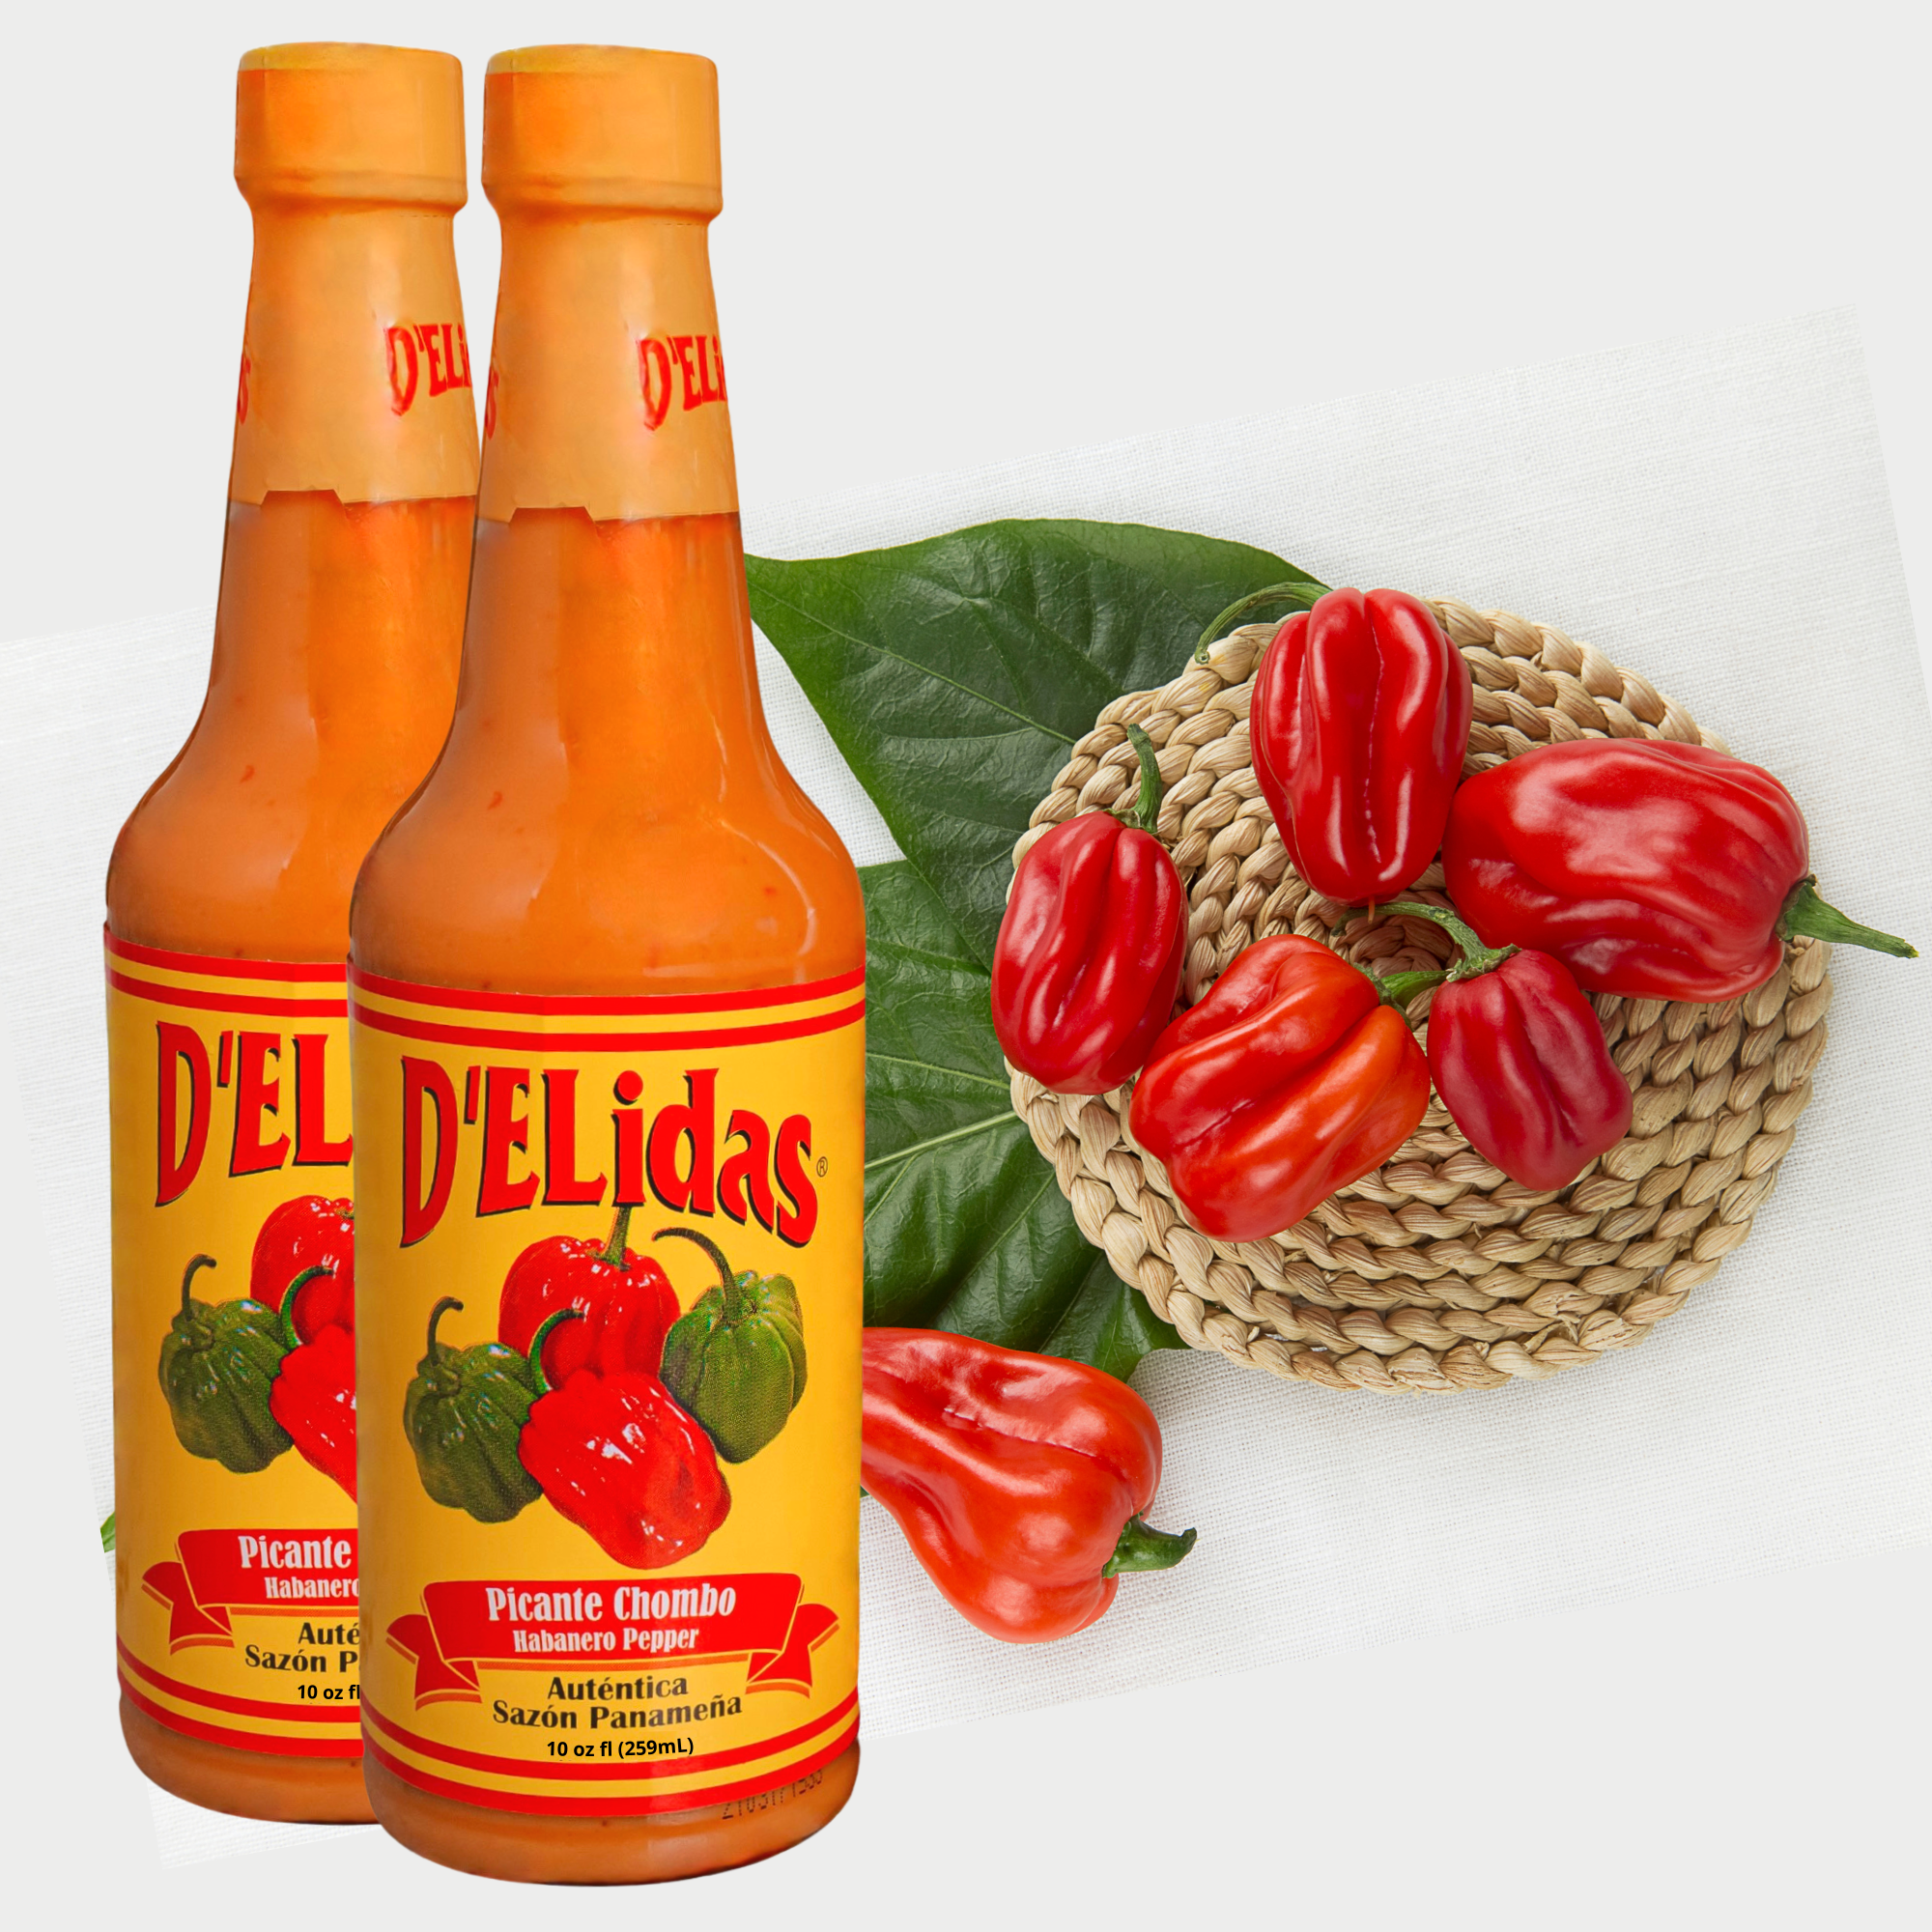 D'ELIDAS Habanero Hot Sauce, All Natural Hot Sauce Made of Habanero Pepper, Chombo Picante Sauce #1 in Panama, Non-GMO and Keto Friendly Food (10oz, 2-pack ) - image 1 of 7